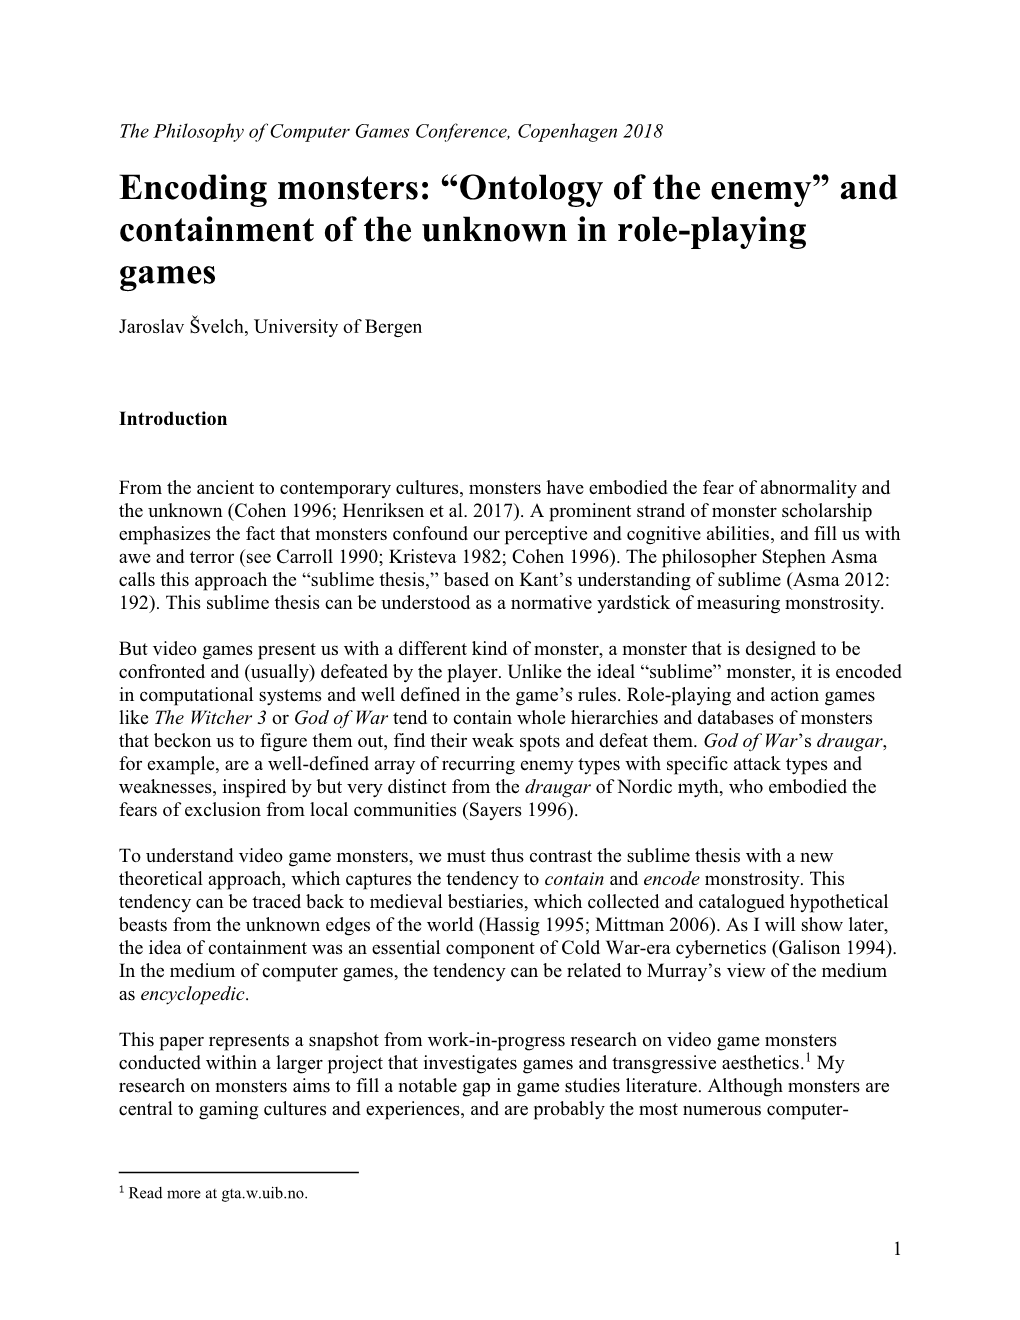 Encoding Monsters: “Ontology of the Enemy” and Containment of the Unknown in Role-Playing Games